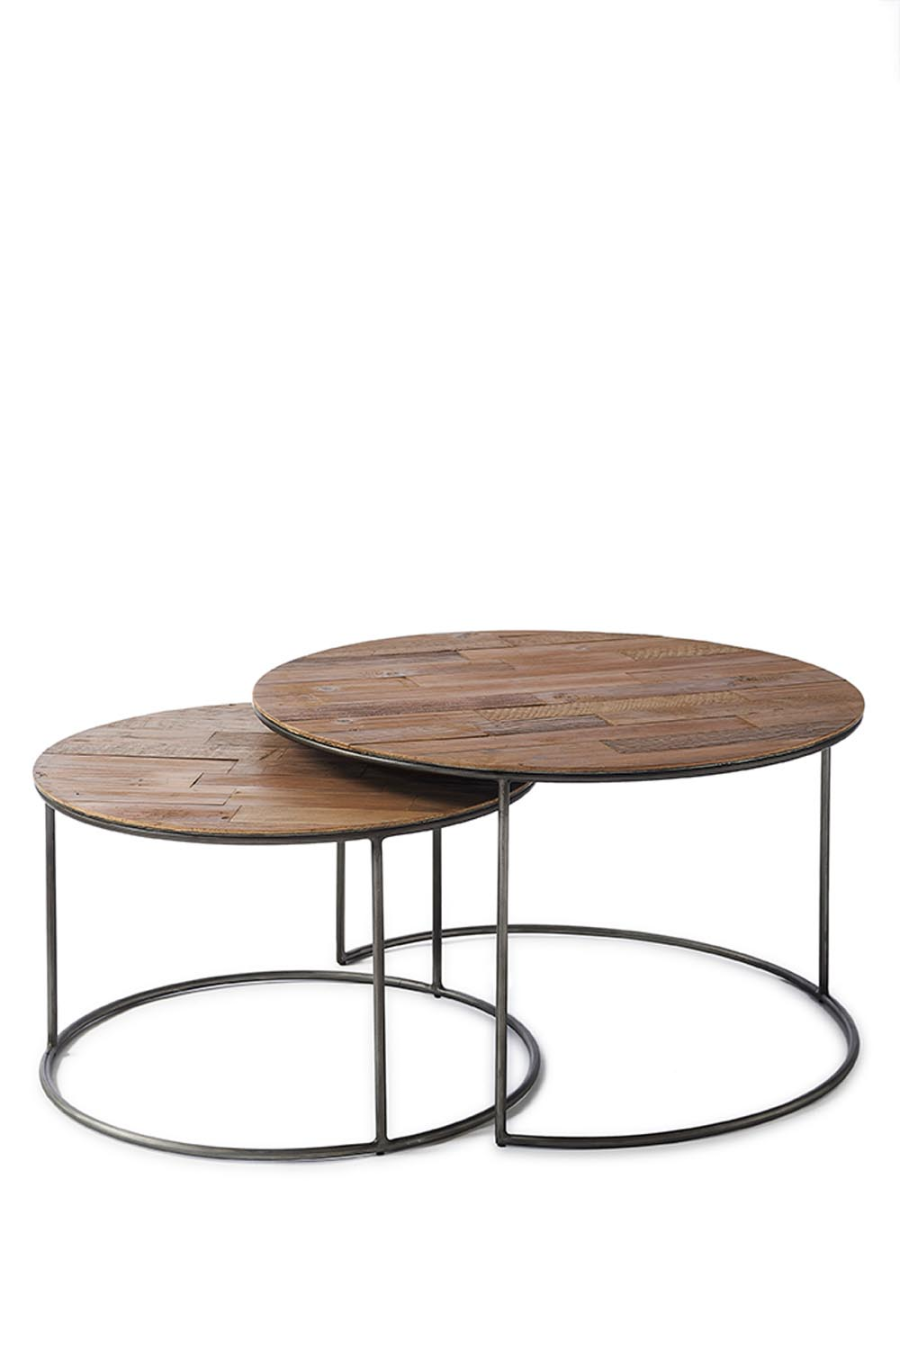 The Market Coffee Table 70dia S/2